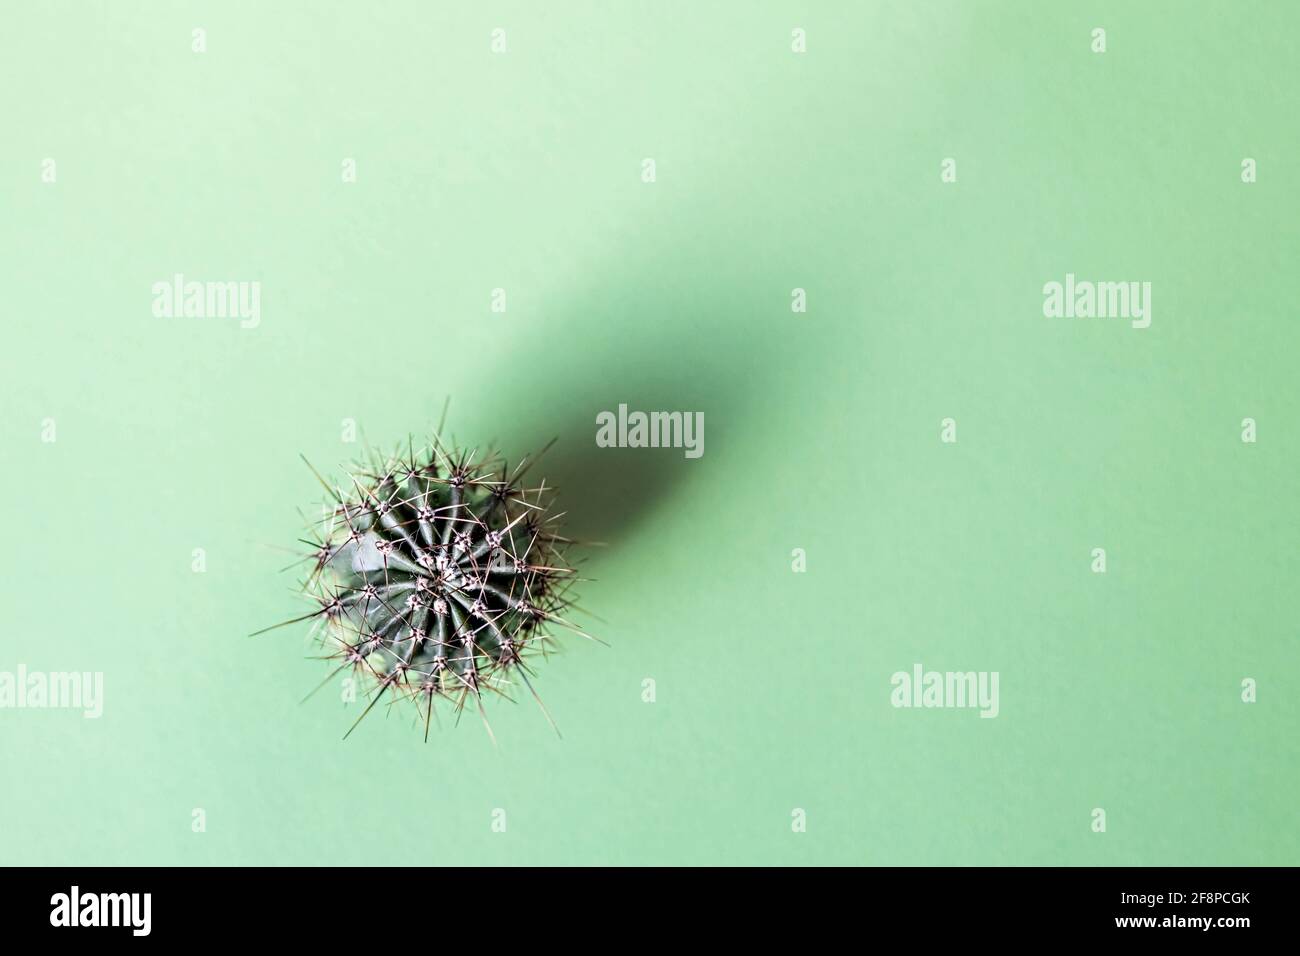 Background from a cactus on a green background. Plant texture with thorns. Stock Photo